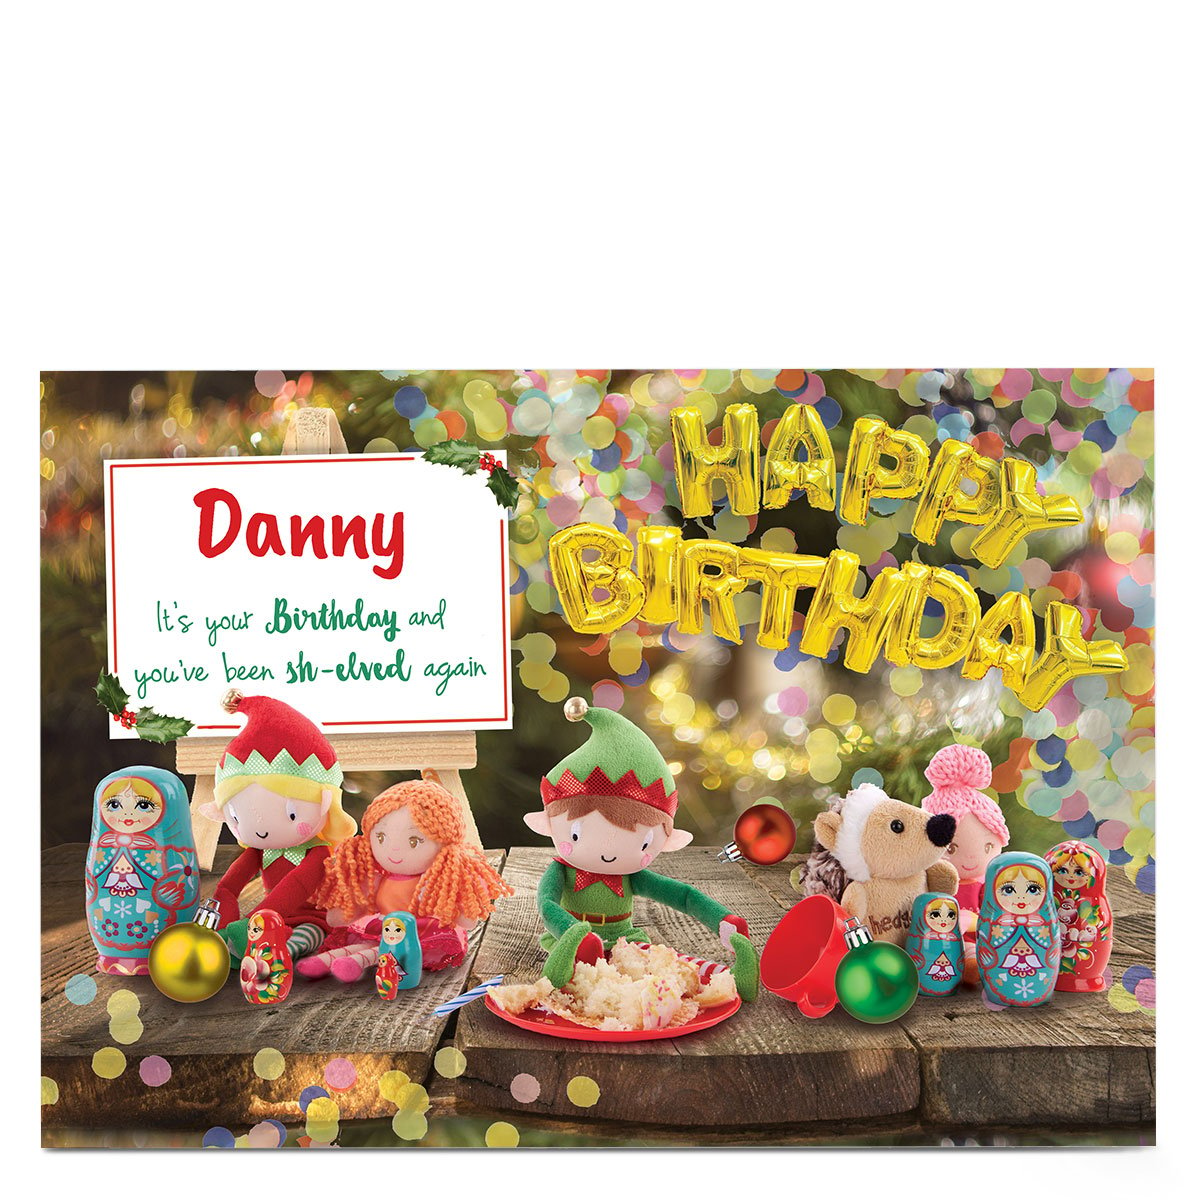 Personalised December Birthday Card - Sh-elved Again, Any Name